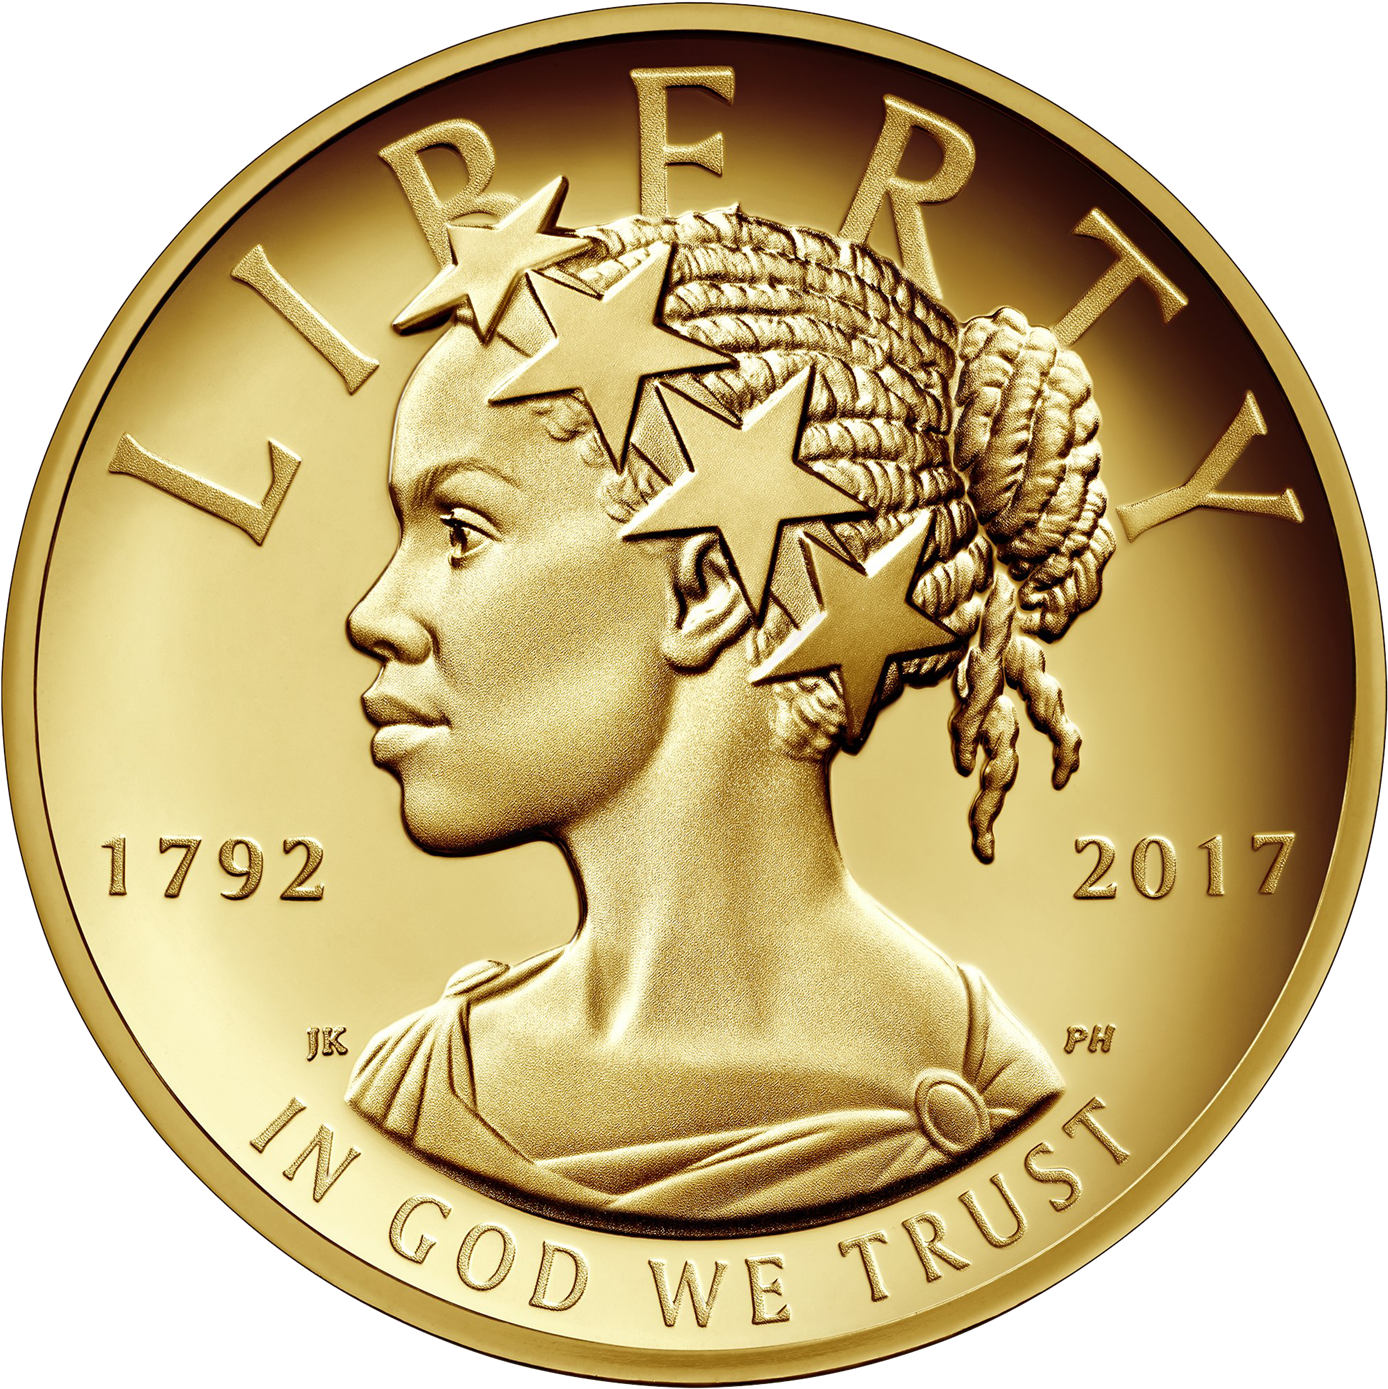 Liberty Trust Gold Coin2017 PNG image